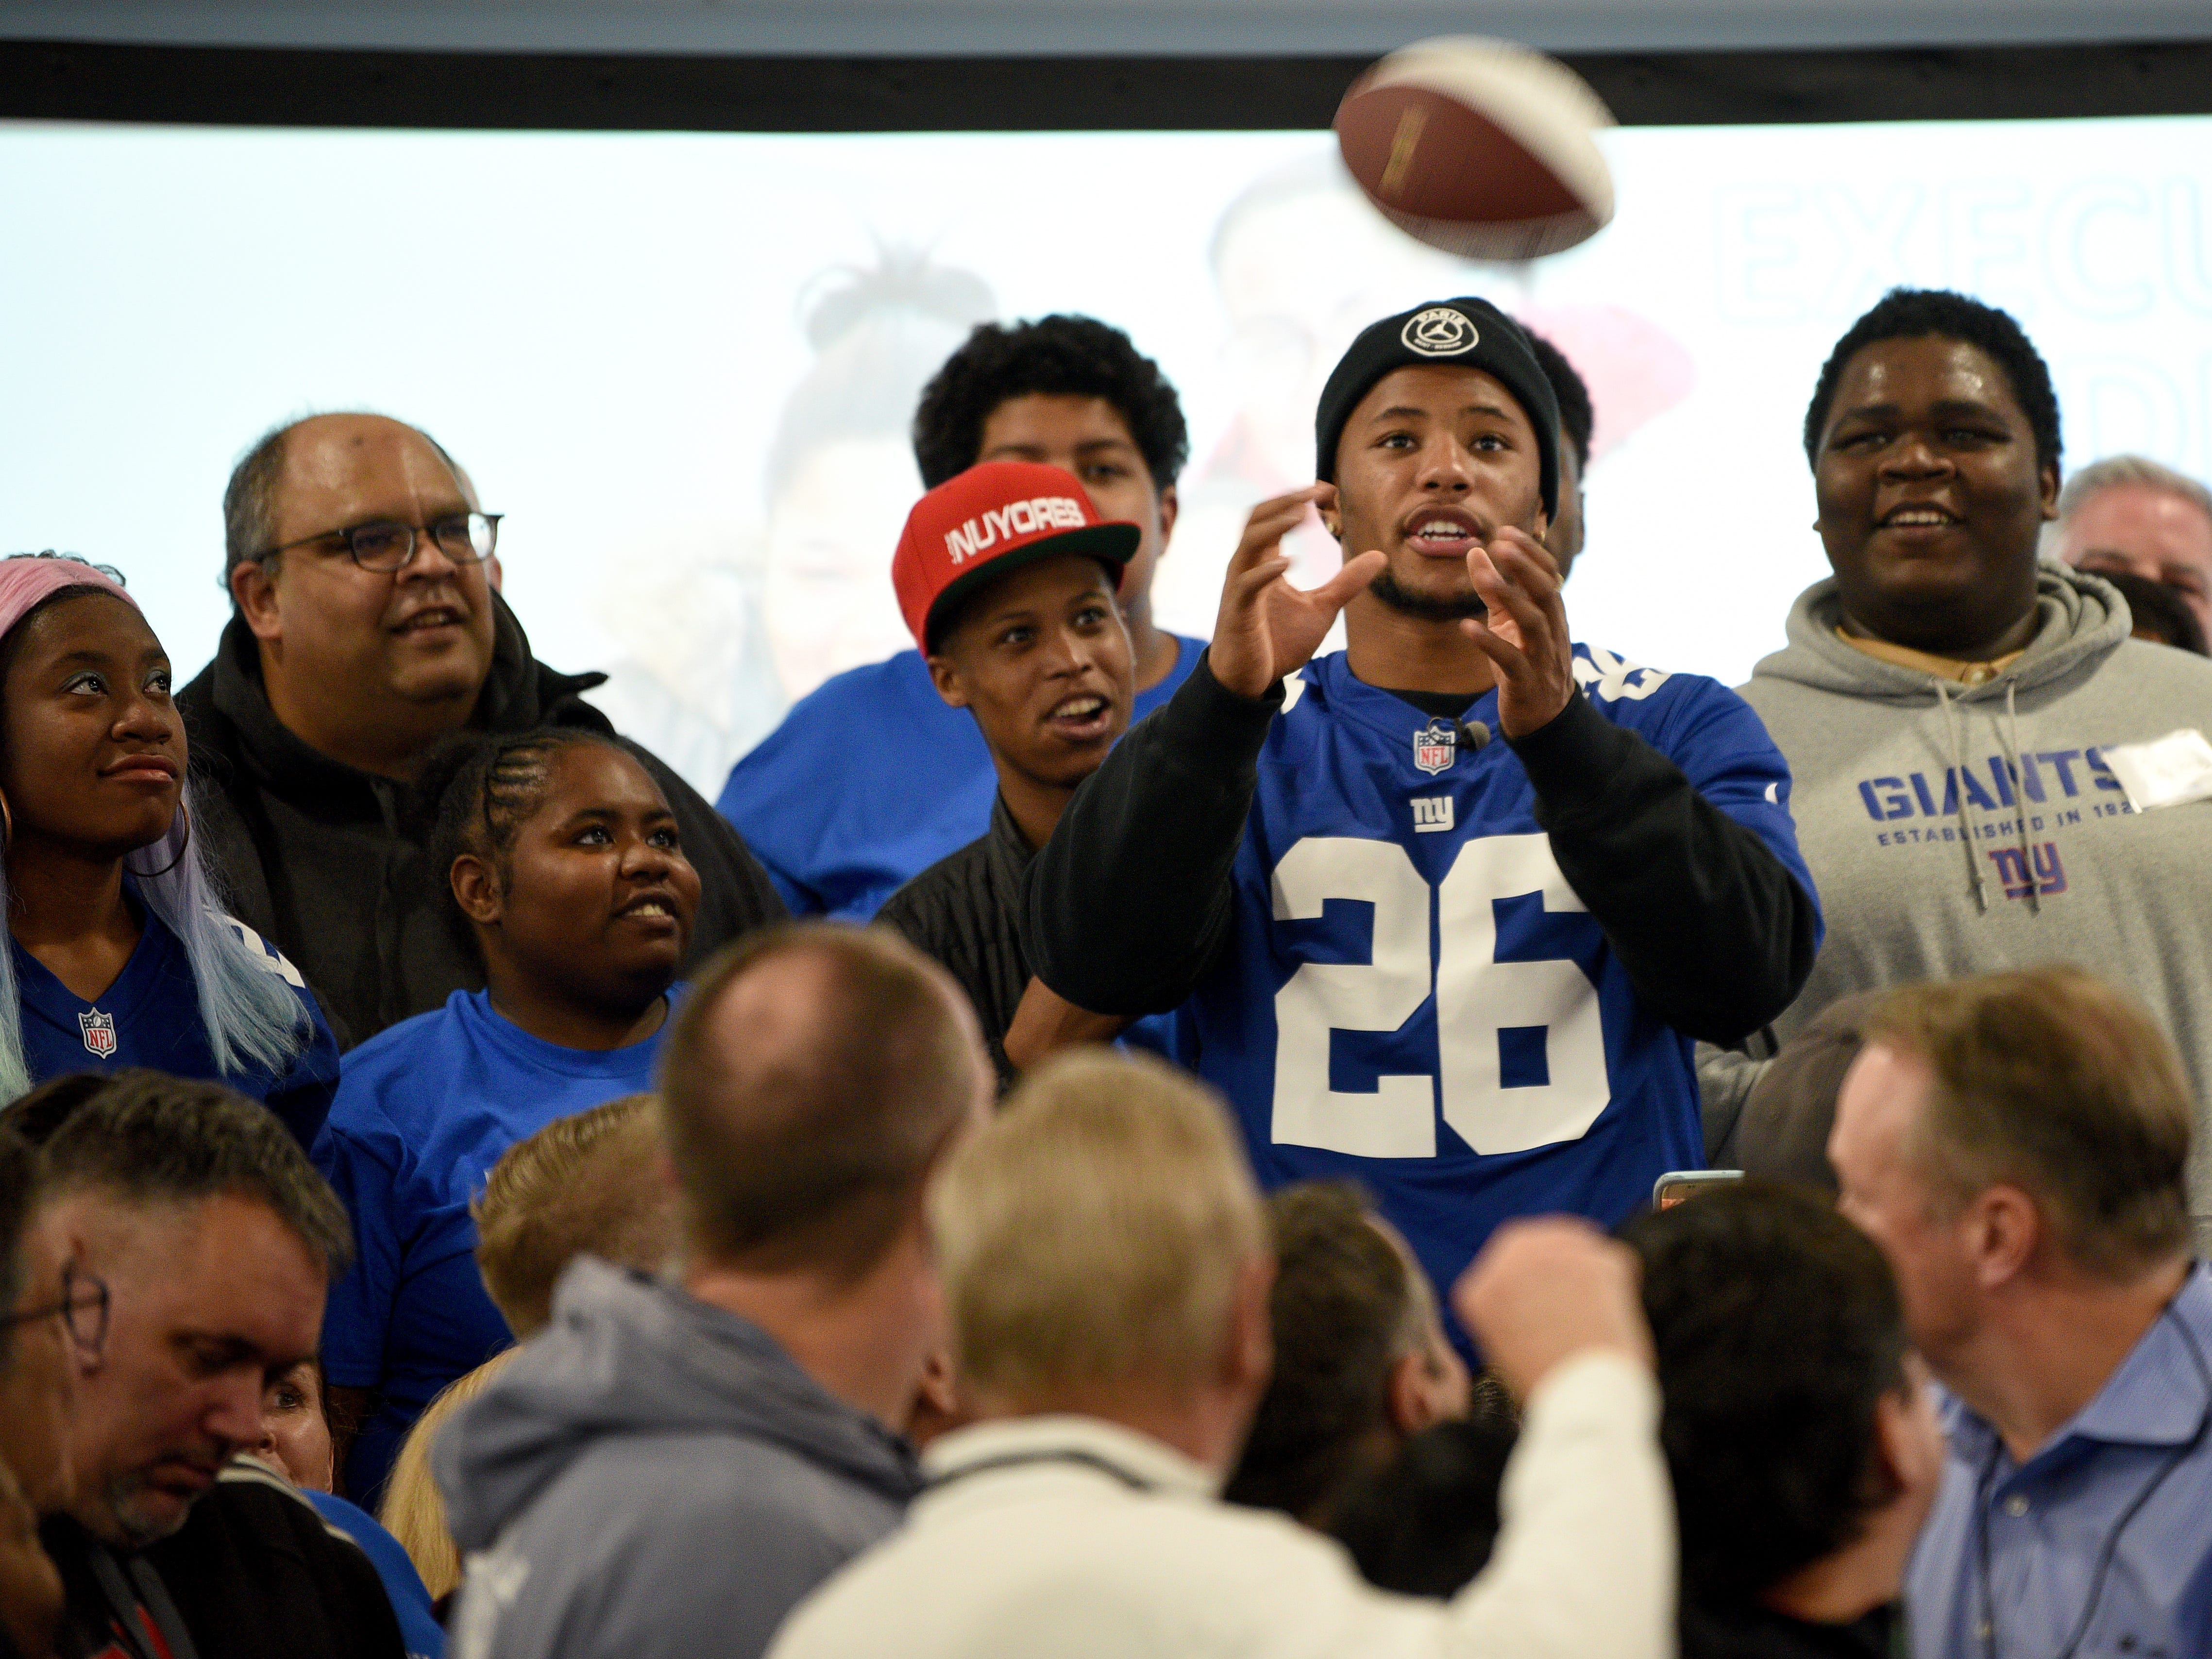 Covenant House holds a Sleep Out Executive Edition in Newark on Thursday November 21, 2019. Covenant House kids and fundraisers prepare to take a photo with Saquon Barkley a player with the Giants and Sleep Out: Executive Edition Chairman.